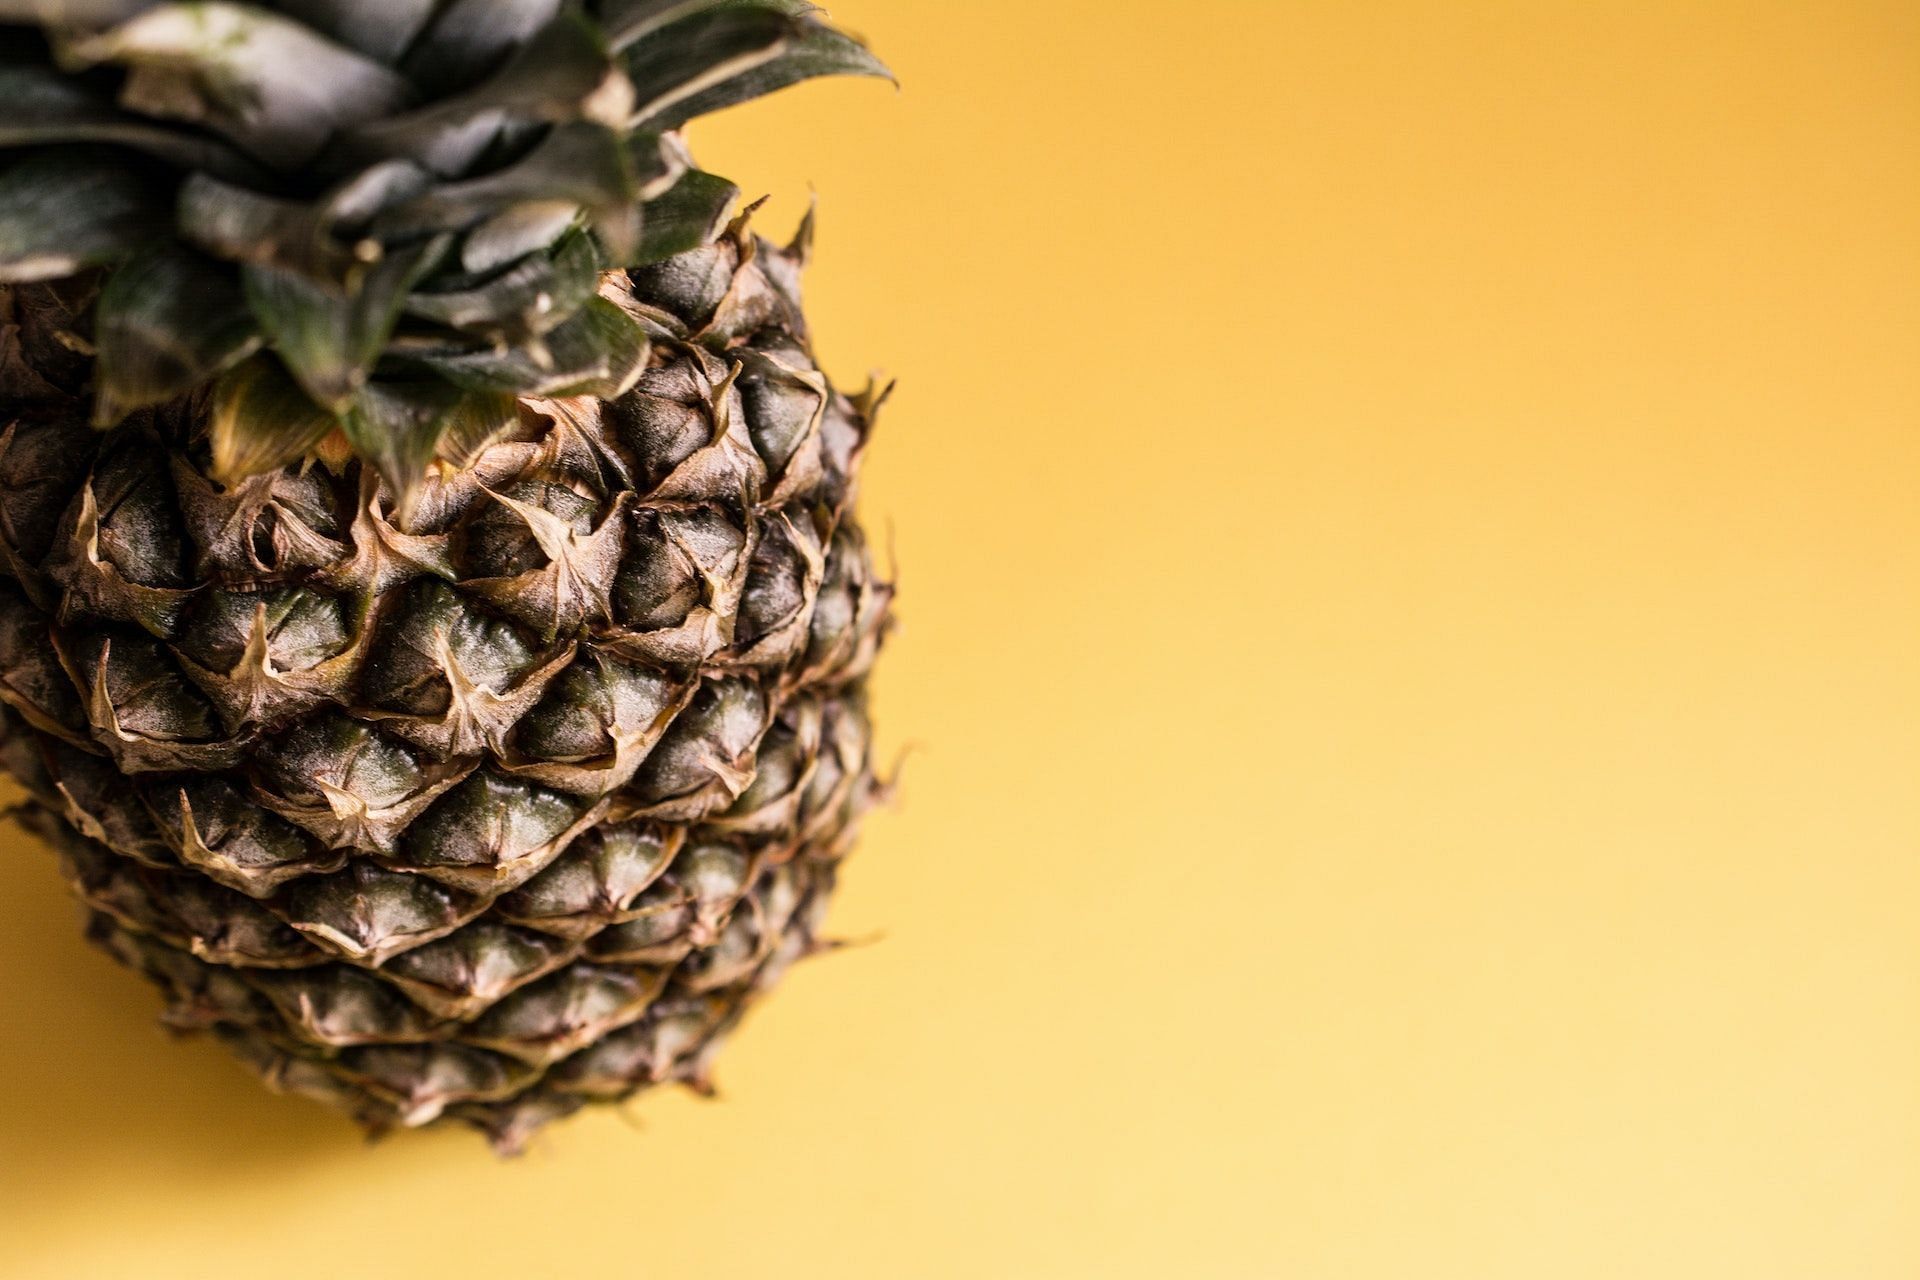 Pineapples have high glycemic index. (Photo via Pexels/PicFoods.com) Oranges are high GI fruits. (Photo via Pexels/Pixabay)